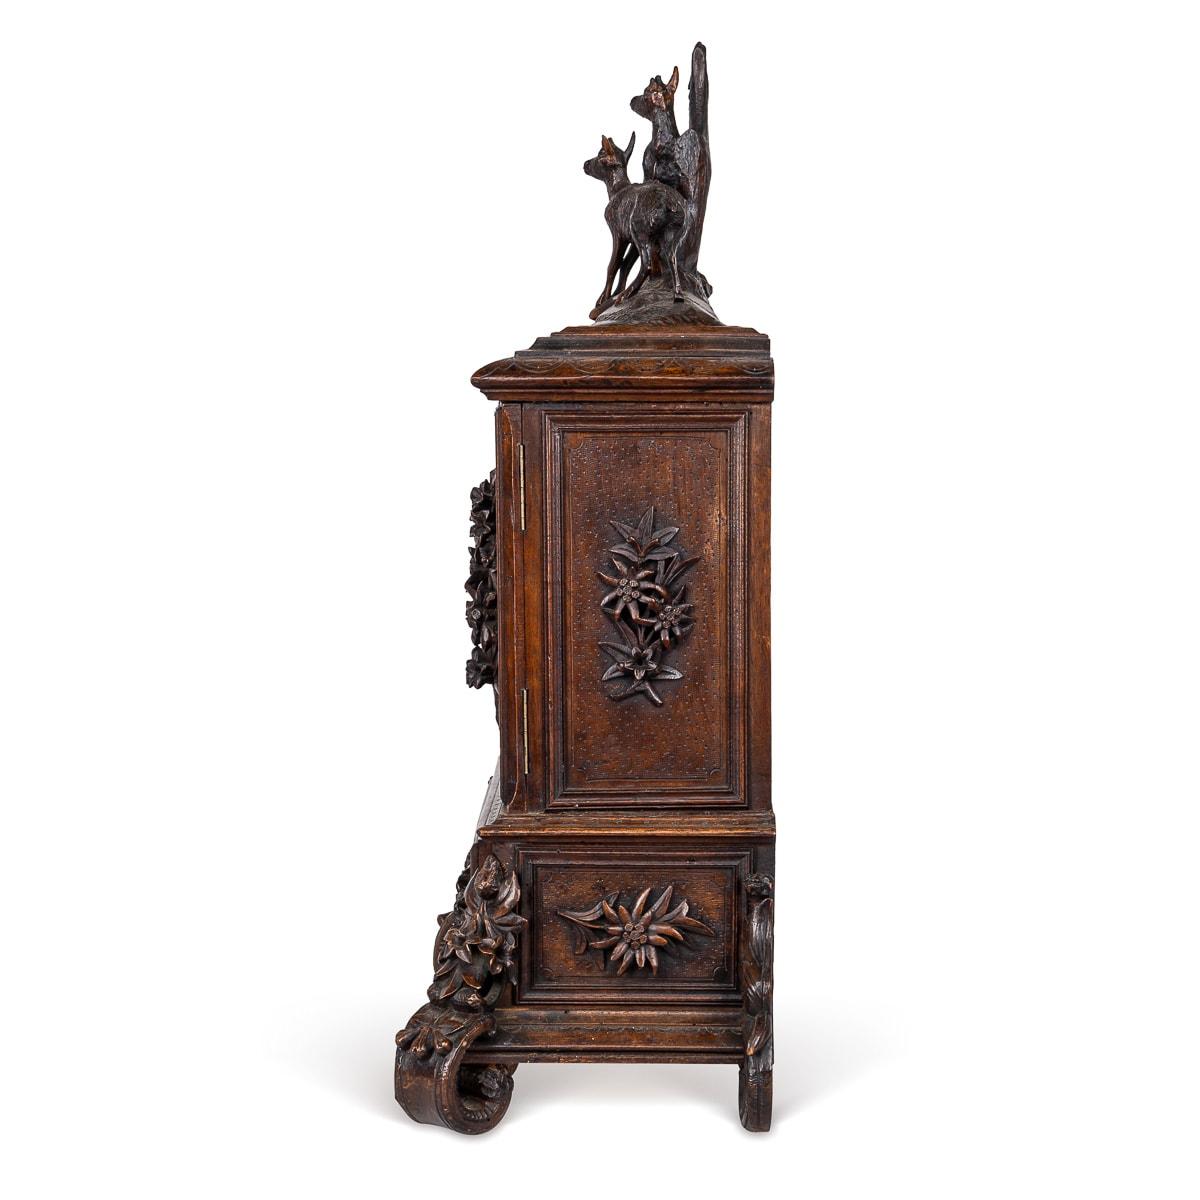 Antique late 19th Century German Black Forest fruitwood humidor. Its top intricately carved with a scene depicting a deer and its young. Below, two doors adorned with molded flowers and leaves lead to a compartmentalised interior, revealing hinged